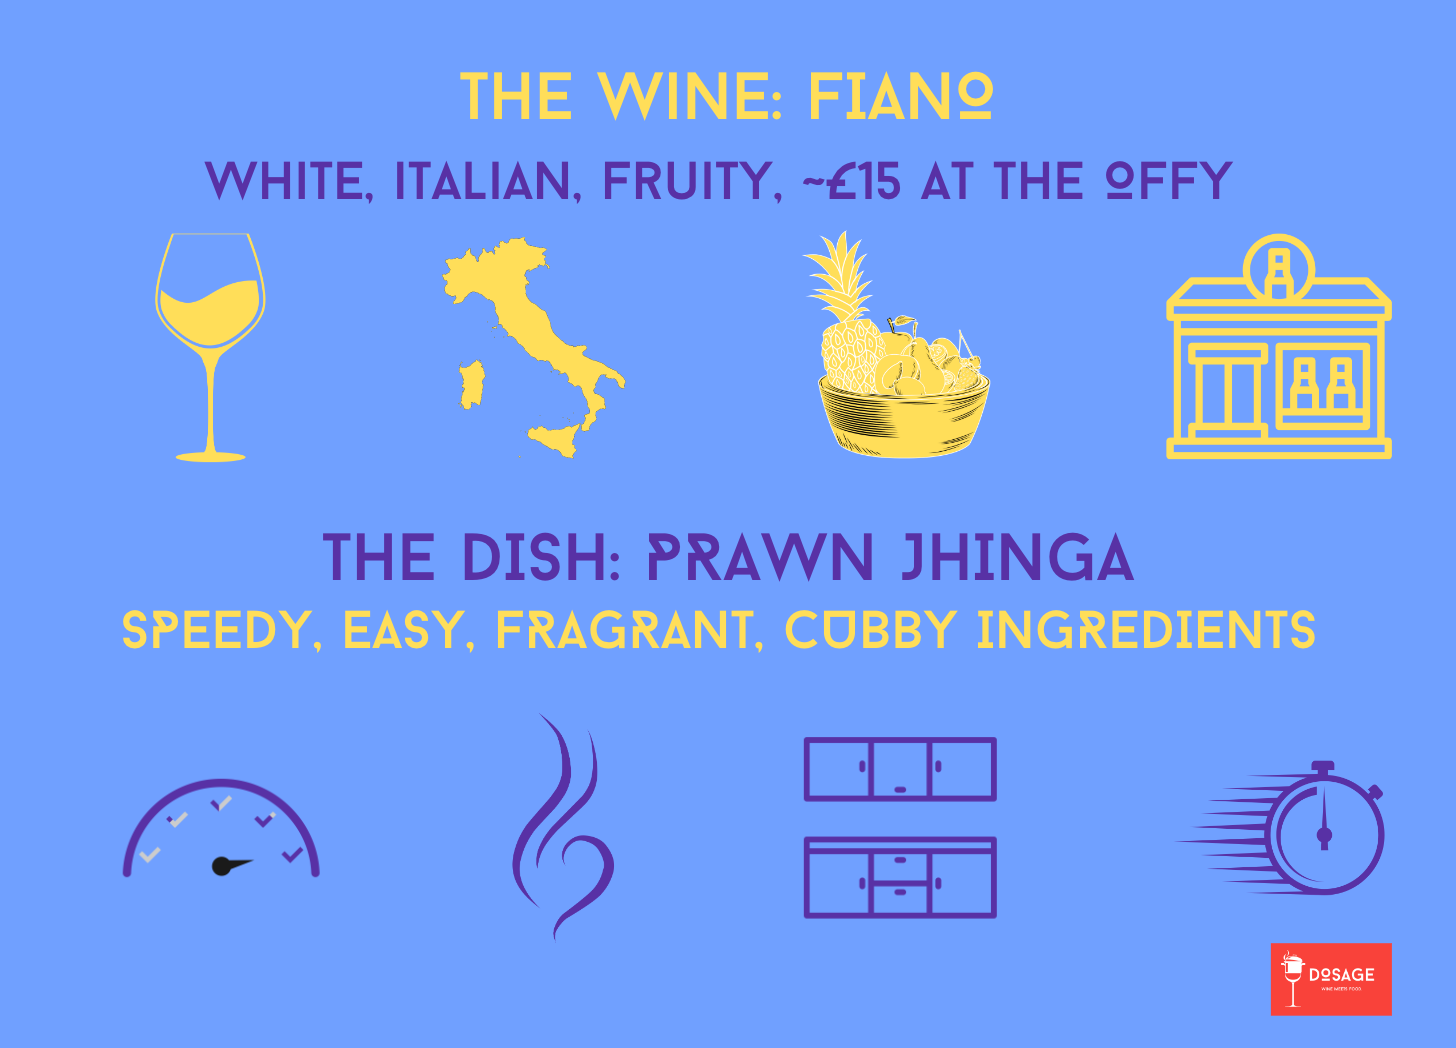 Infographic showing how Italian white wines such as Fiano go really well with Indian cooking, such as prawn curry